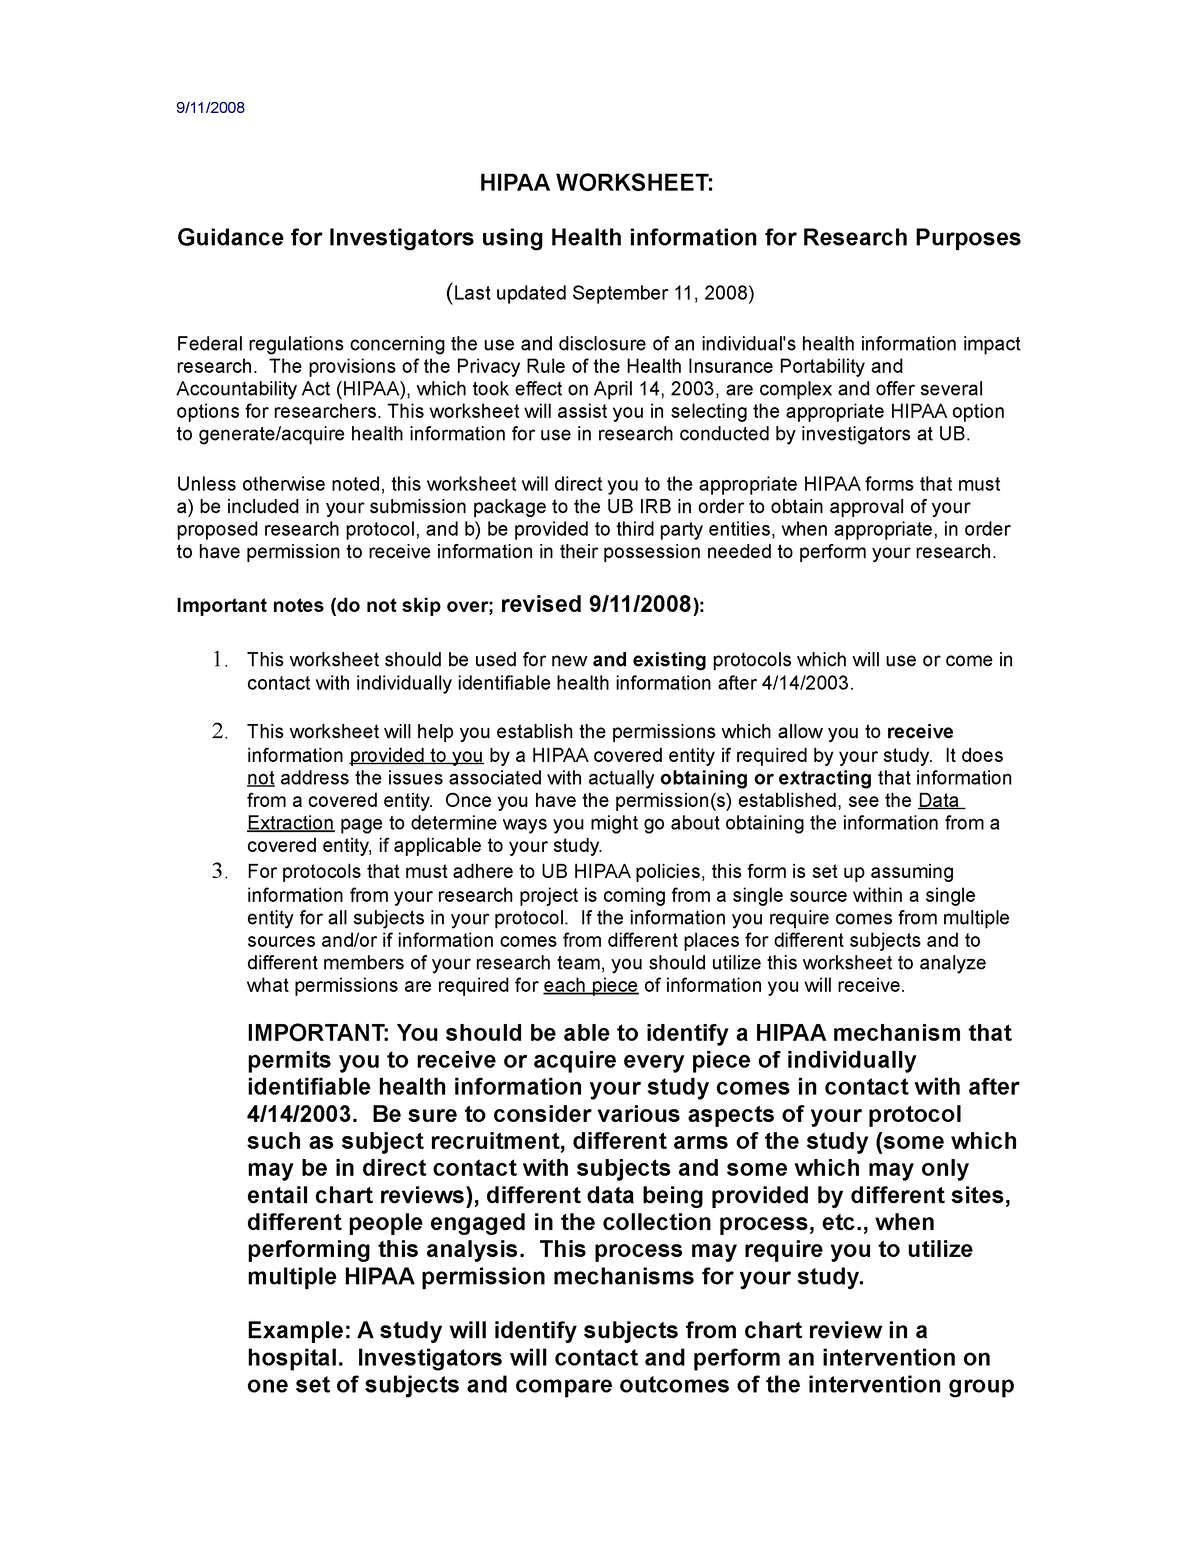 Hrp 330 Worksheet Hipaa Authorization For Additional Guidance